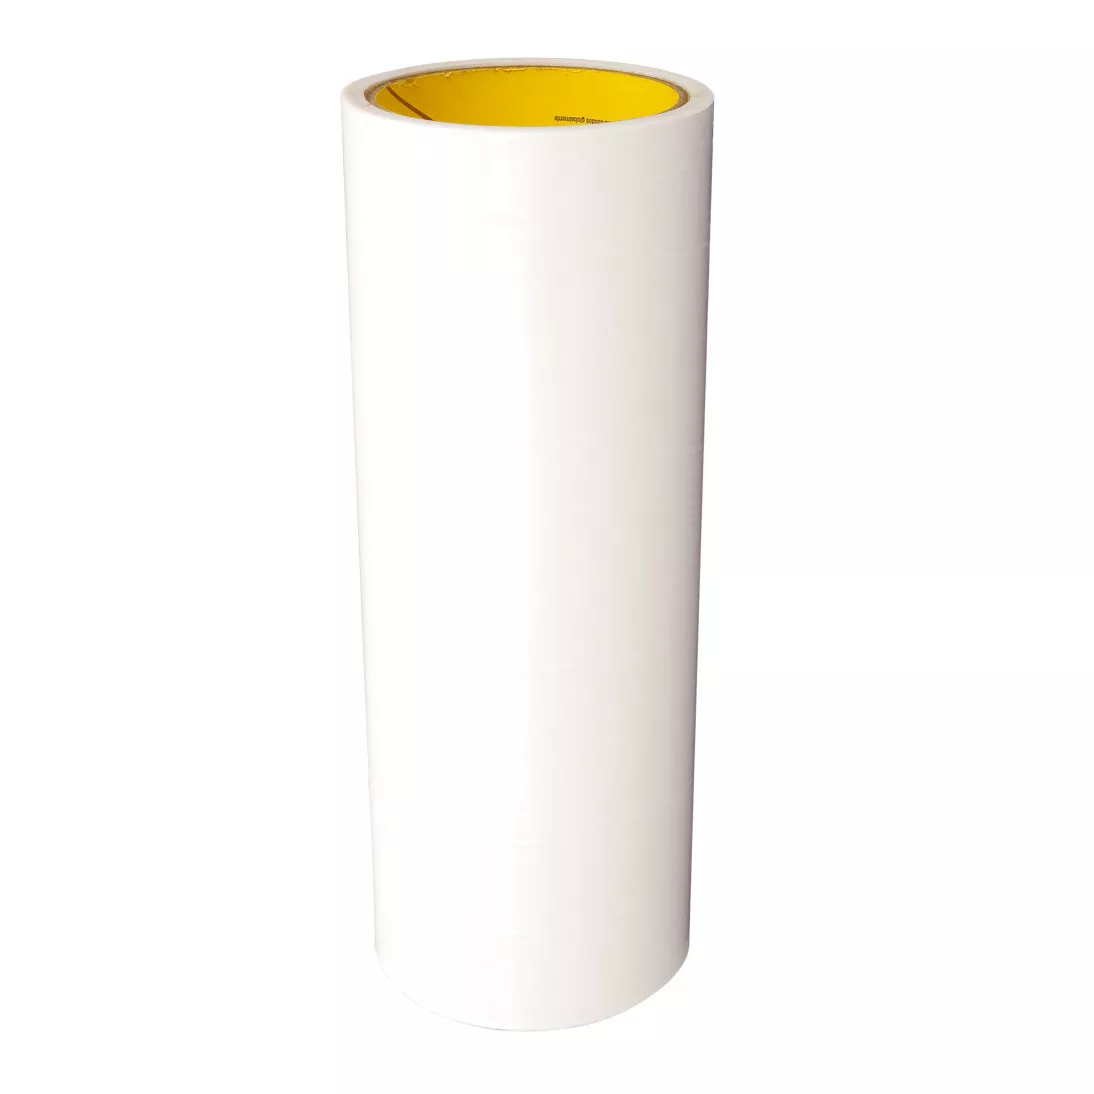 3M™ Double Coated Tape 9816L, 54 in X 60 yd, 3.5 mil, 1 roll per case